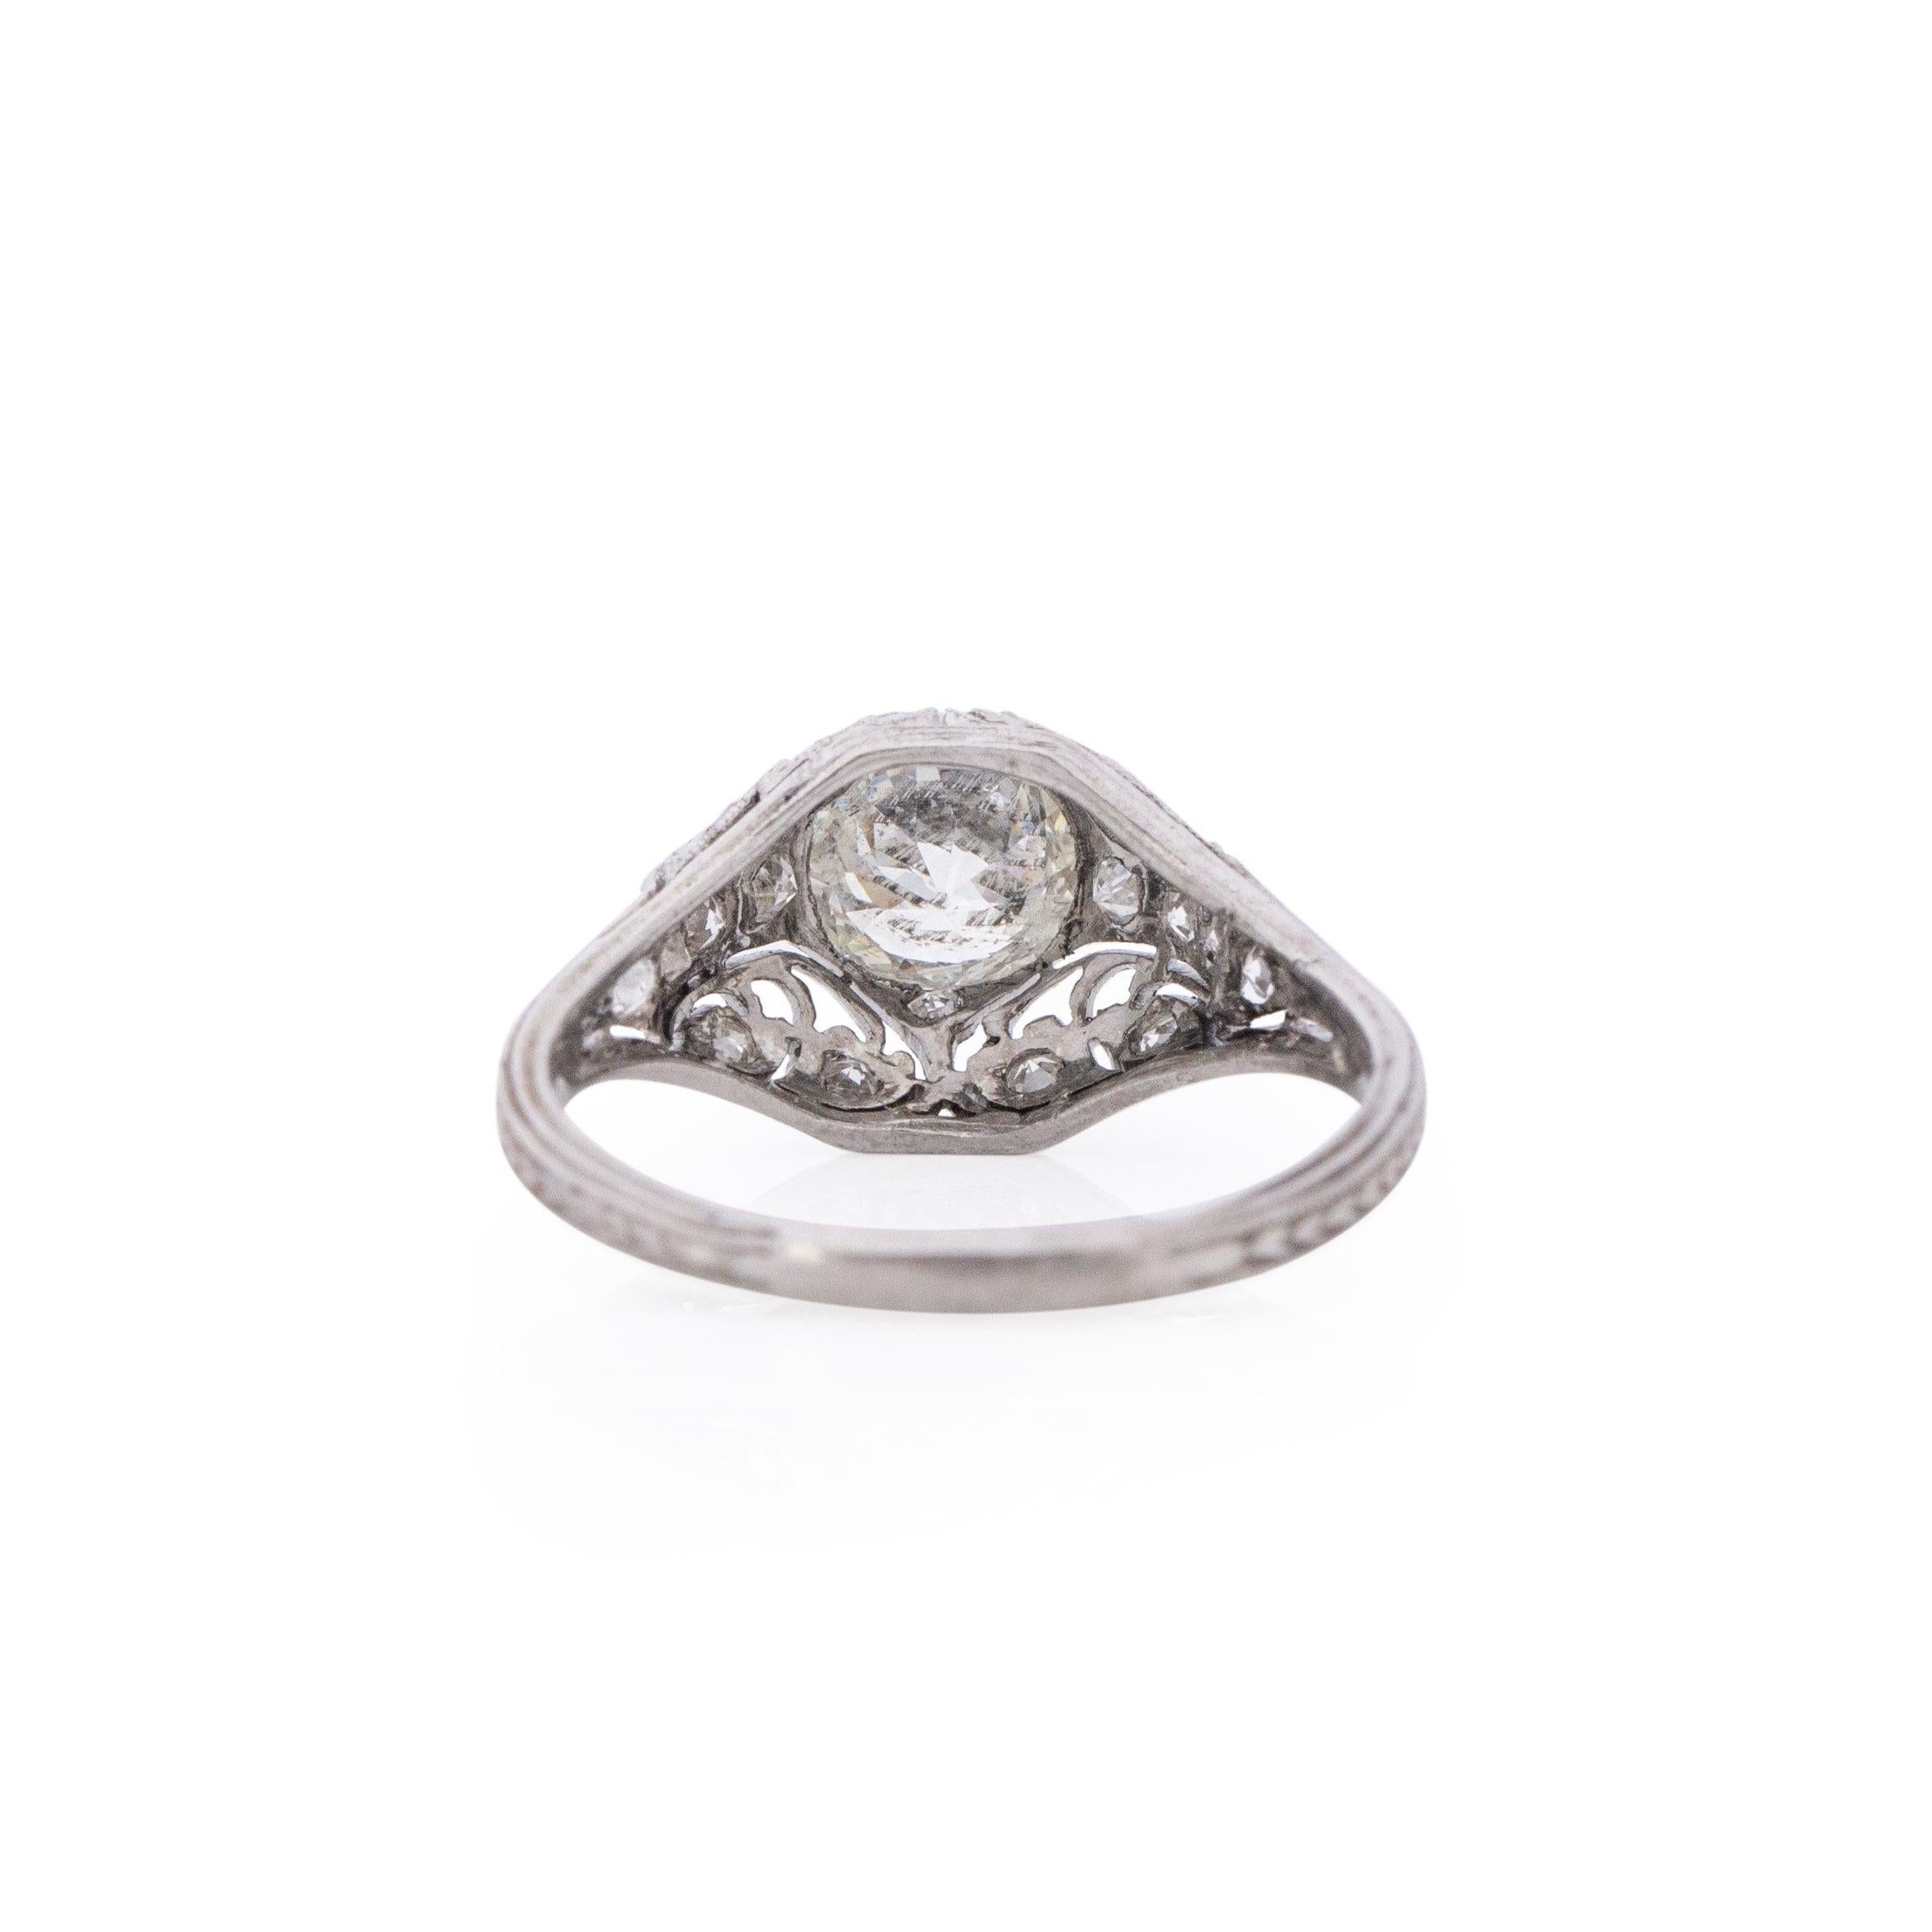 Circa 1901 Edwardian Platinum .98Ct Diamond Antique Filigree Engagement Ring In Good Condition For Sale In Addison, TX